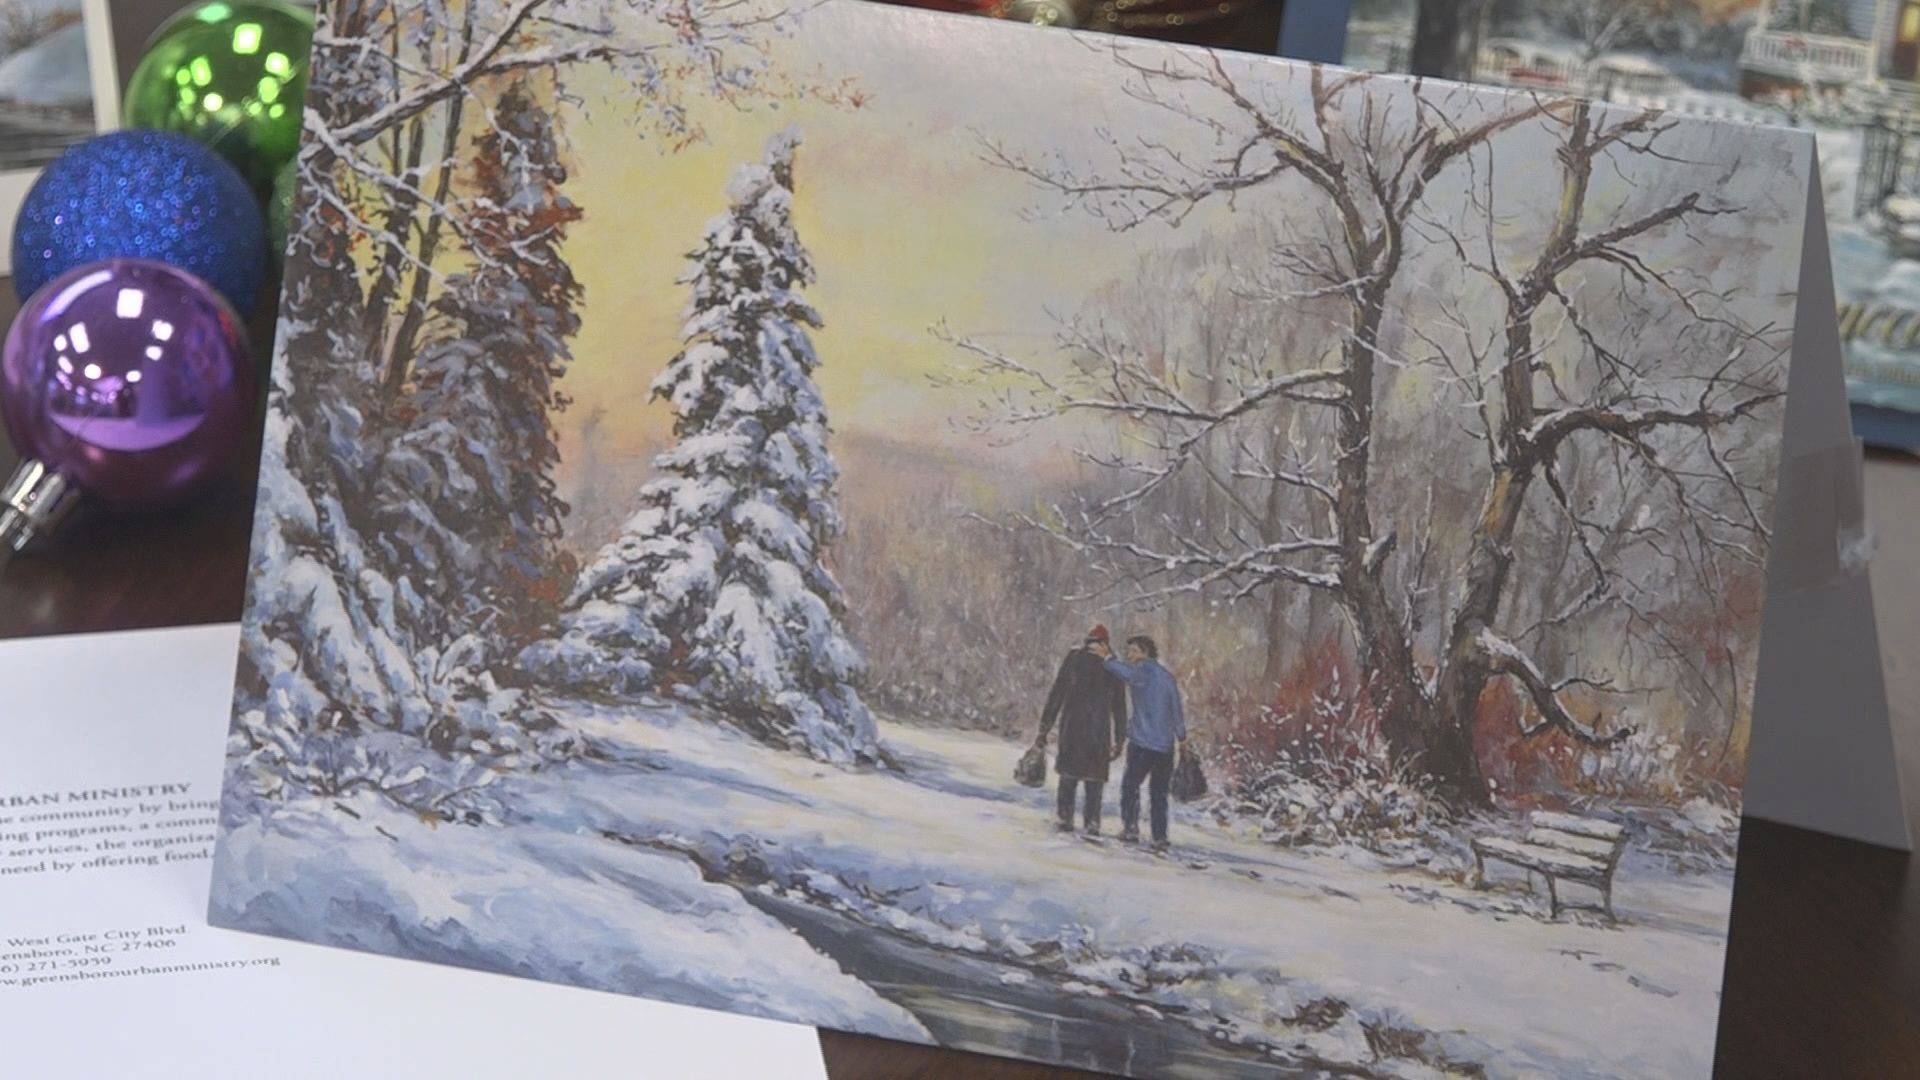 Bill Mangum is known for his annual painting that raises awareness and funds for the needy and homeless in North Carolina. It’s called the Honor Card program.